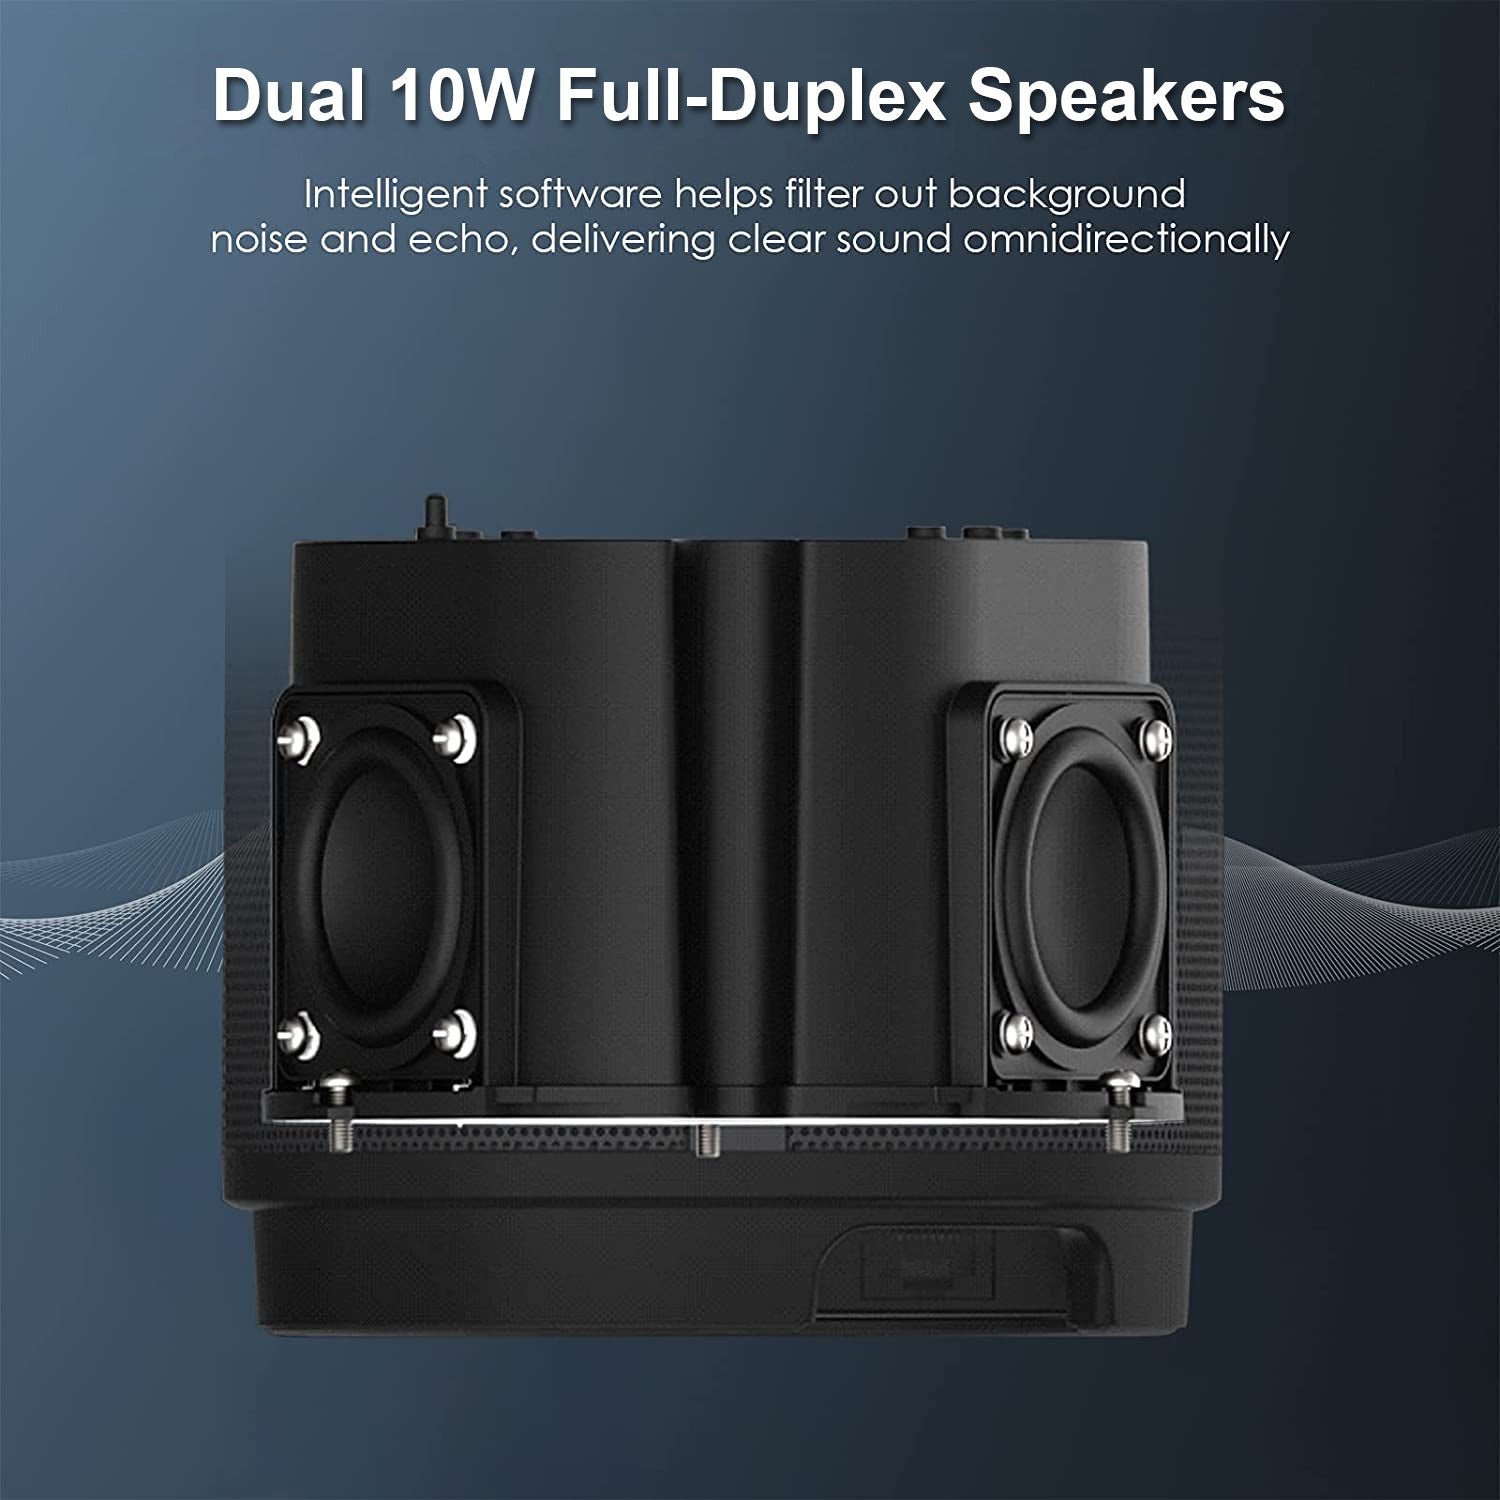 Conference Camera with Dual 10W Full-Duplex Speakers, providing clear omnidirectional sound.